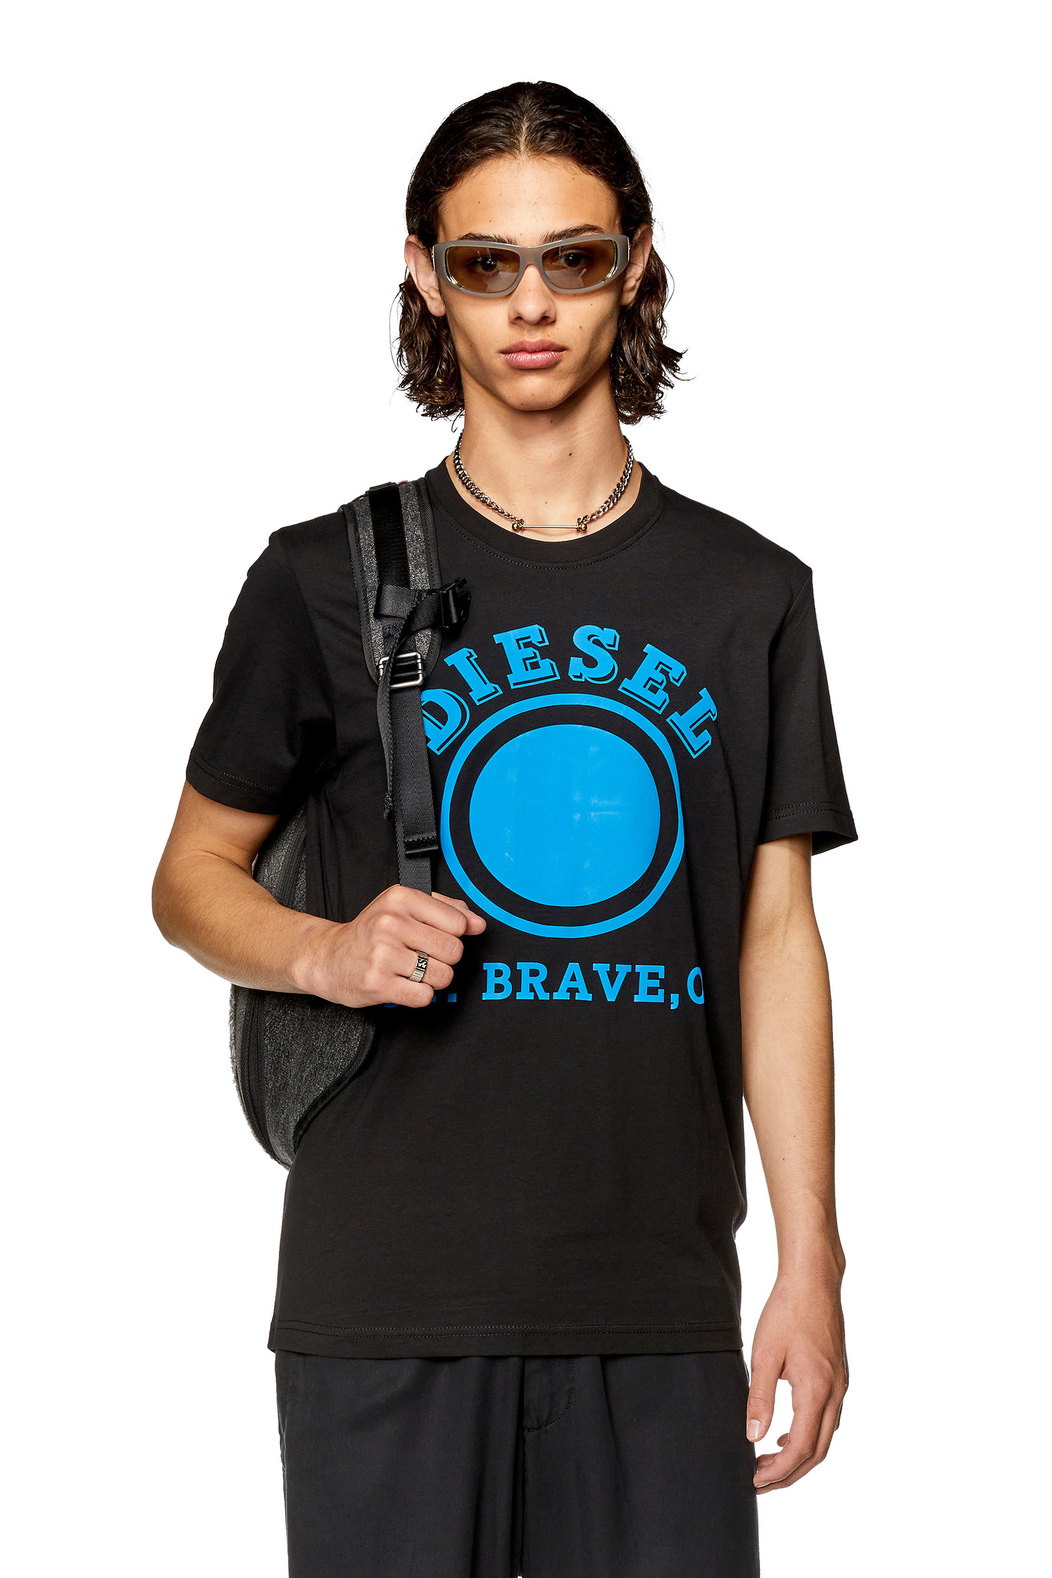 T-shirt with Diesel O.T. Brave print